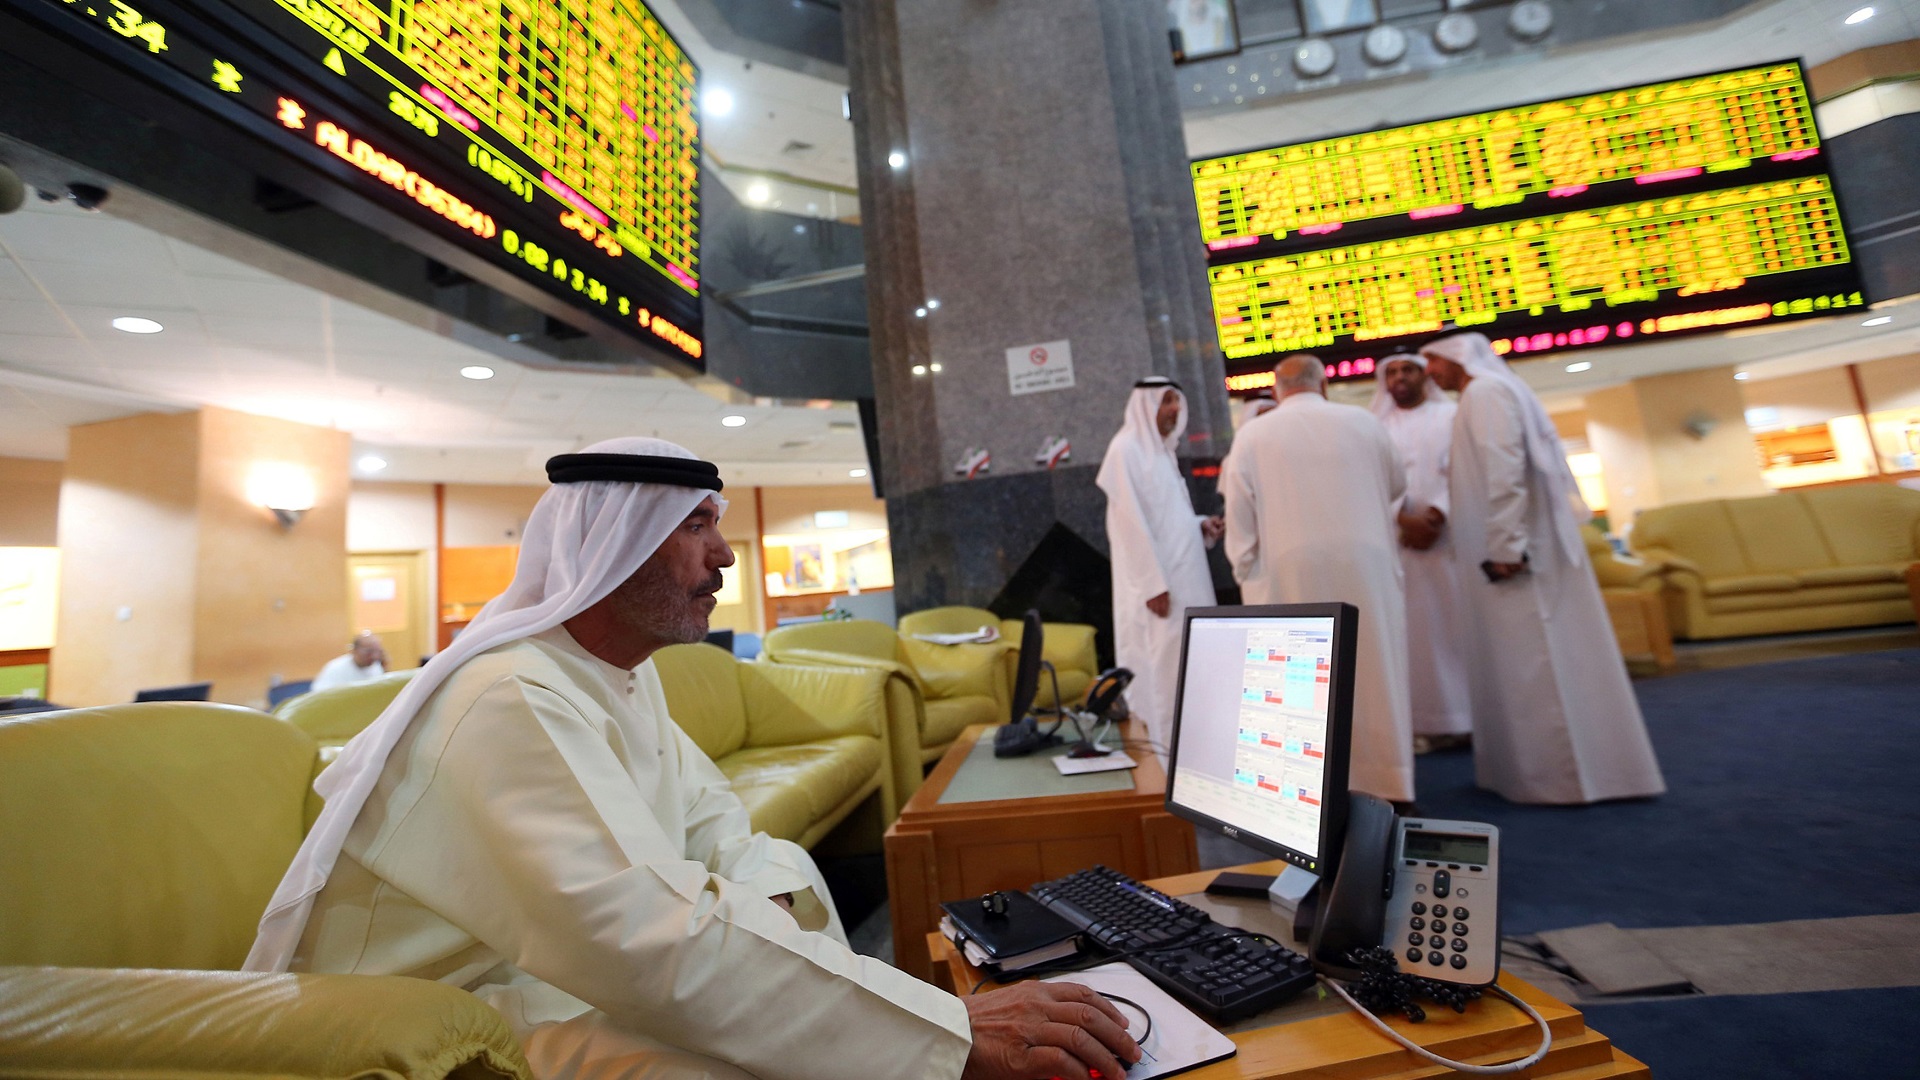 UAE Stock Markets Achieve Liquidity of 1.25 Billion Dirhams with Focus on Real Estate, Financial, and Banking Sectors